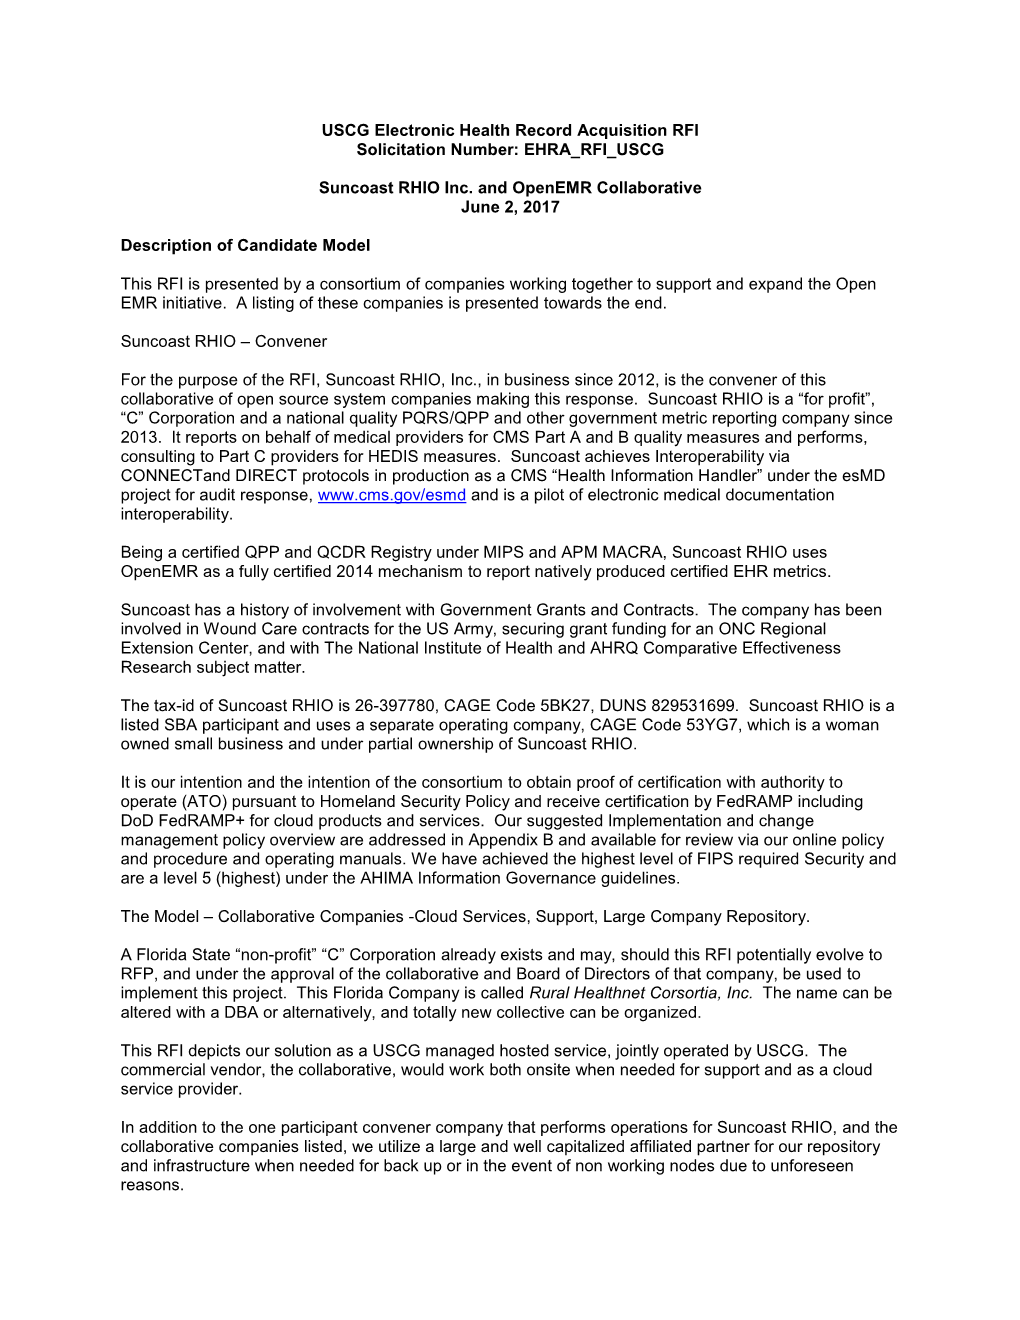 USCG Electronic Health Record Acquisition RFI Solicitation Number: EHRA RFI USCG